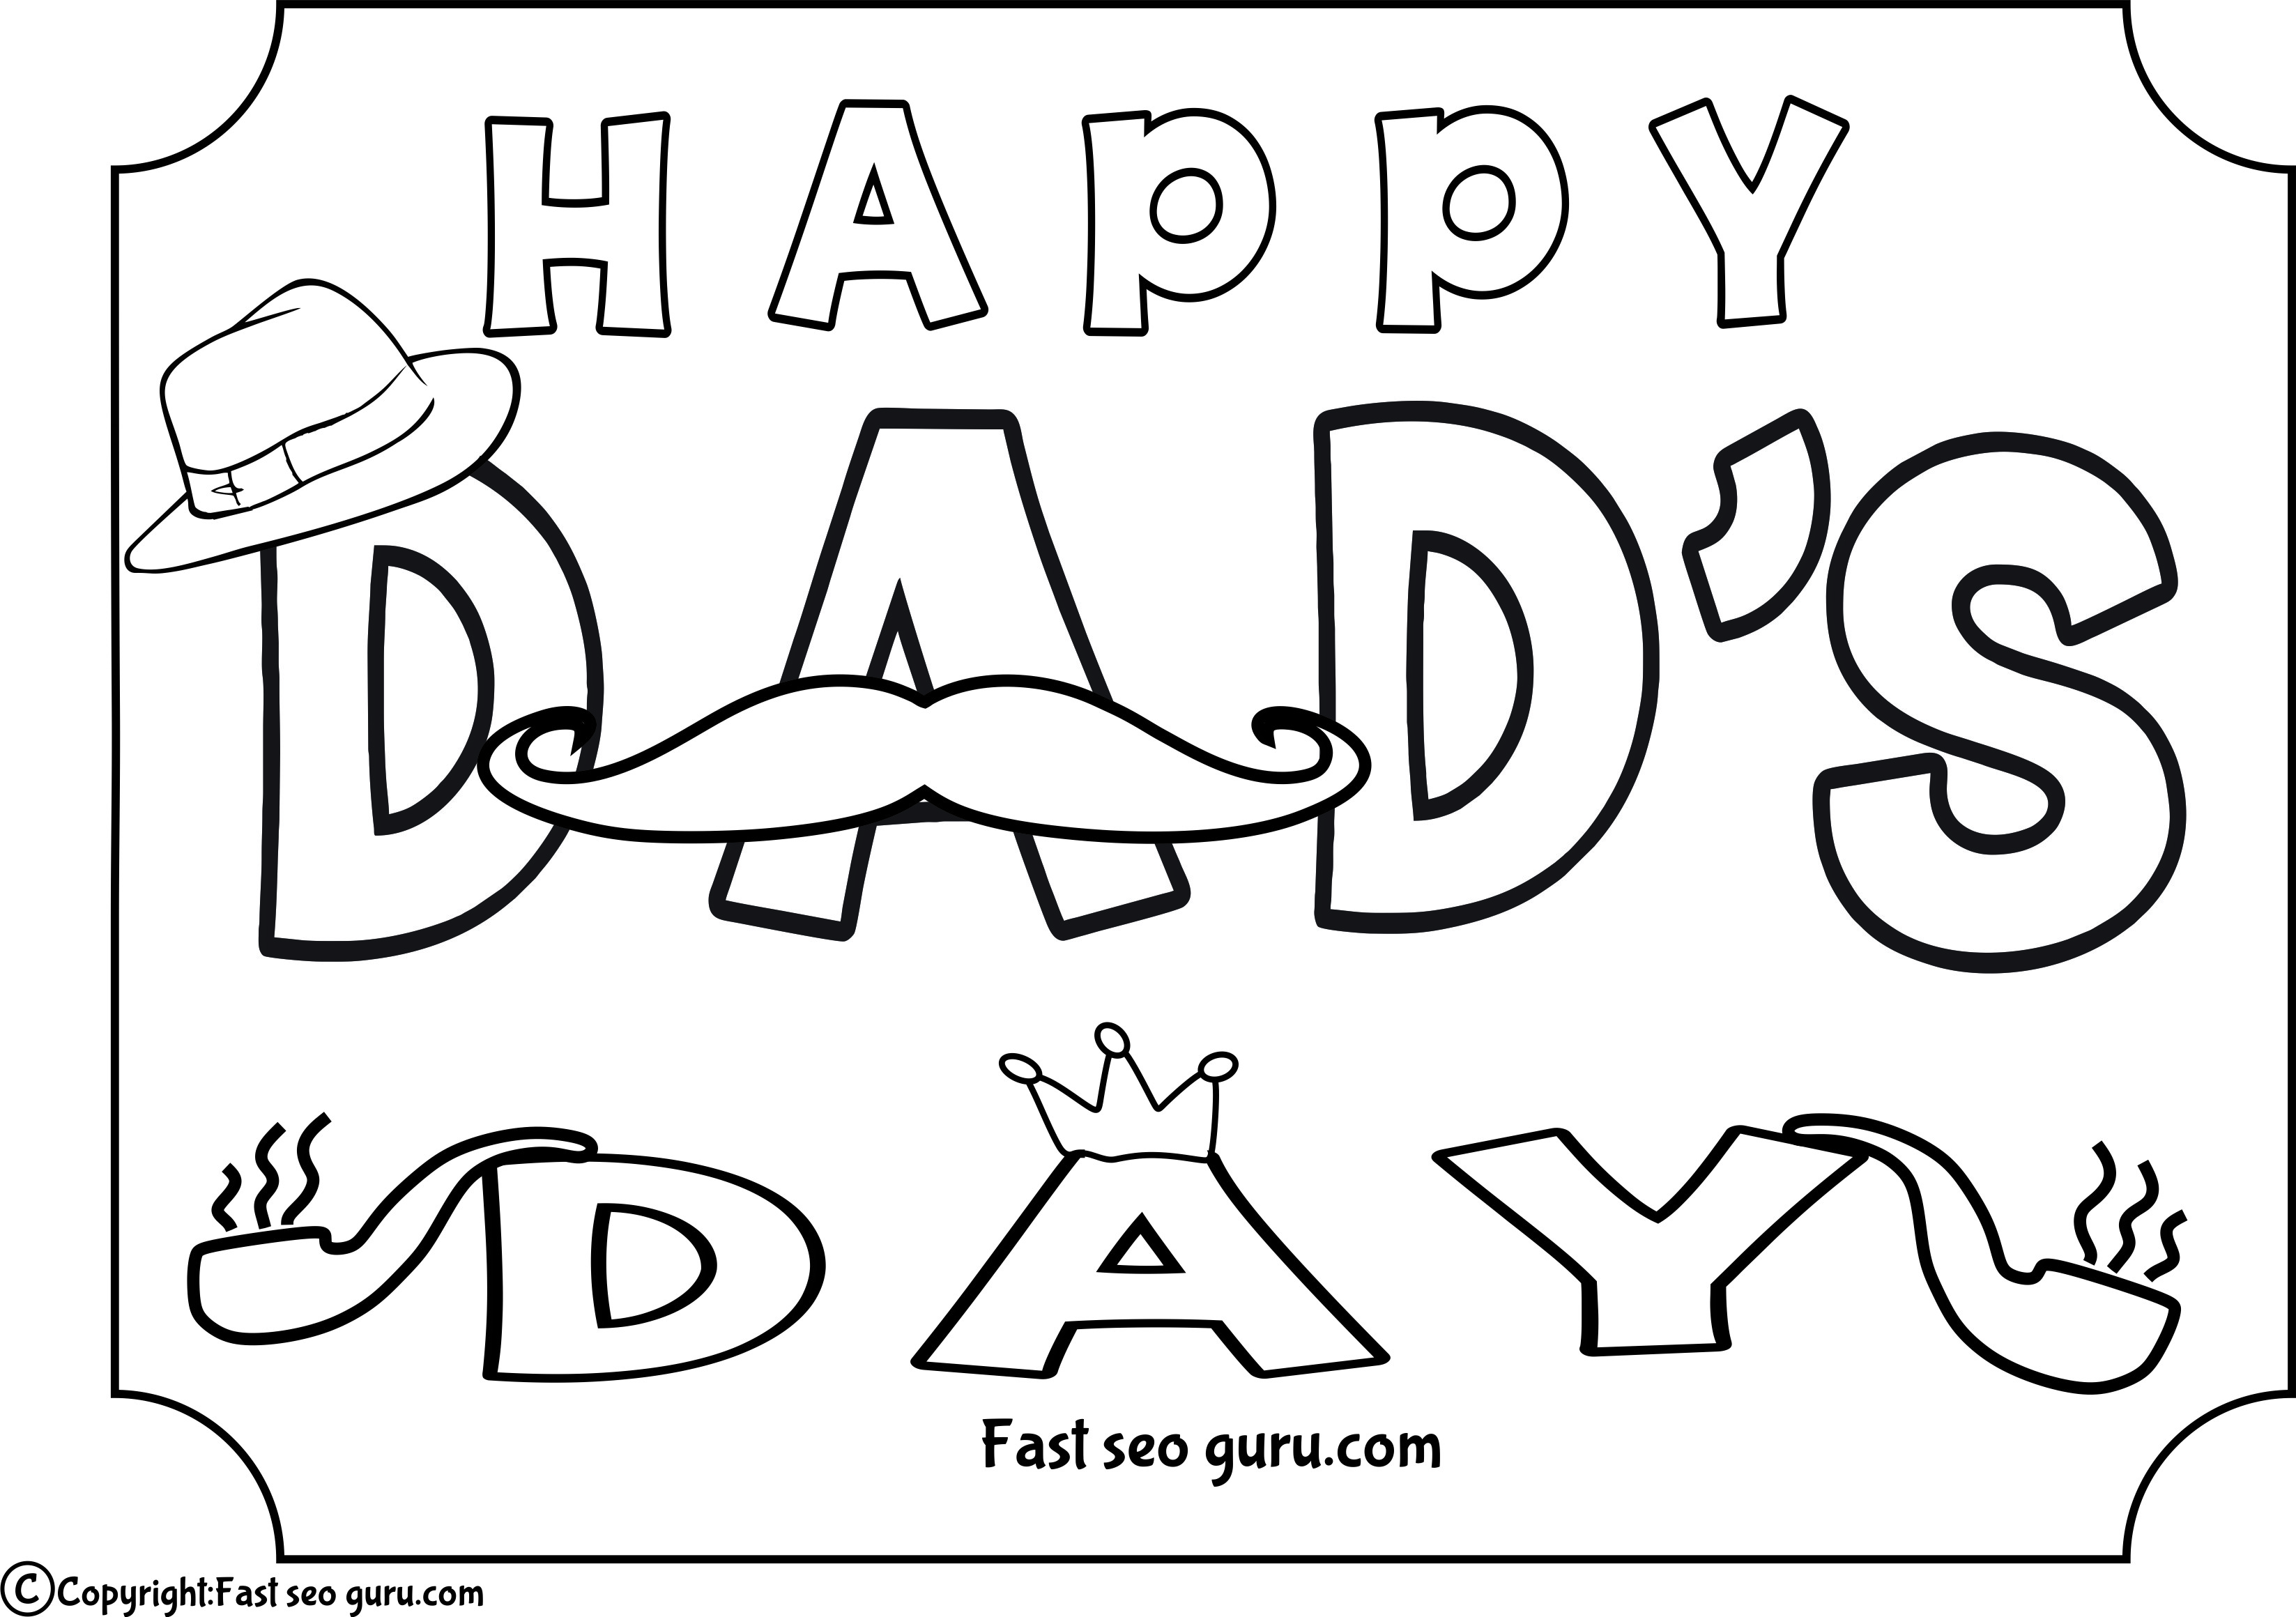 Printable happy dads day coloring pages for kids